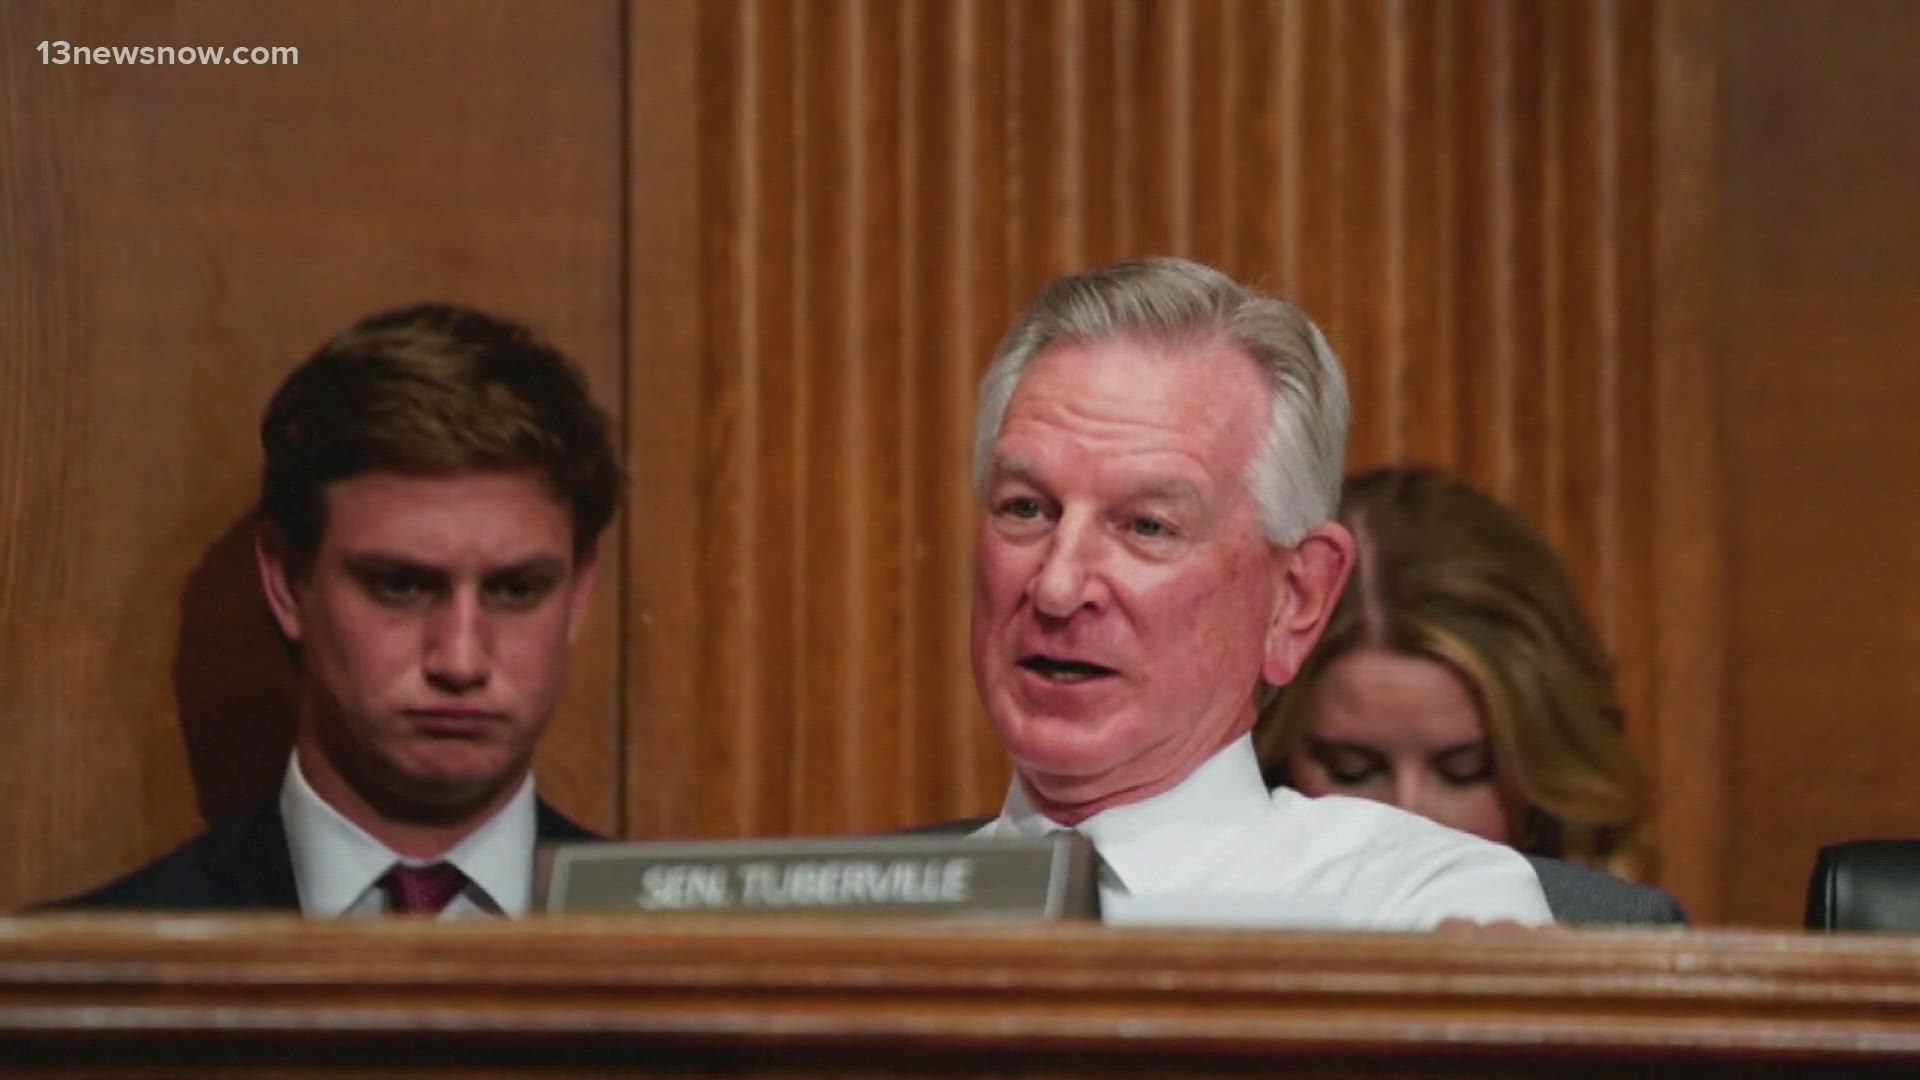 For months, Sen. Tommy Tuberville has kept military promotions in limbo as part of an abortion protest.